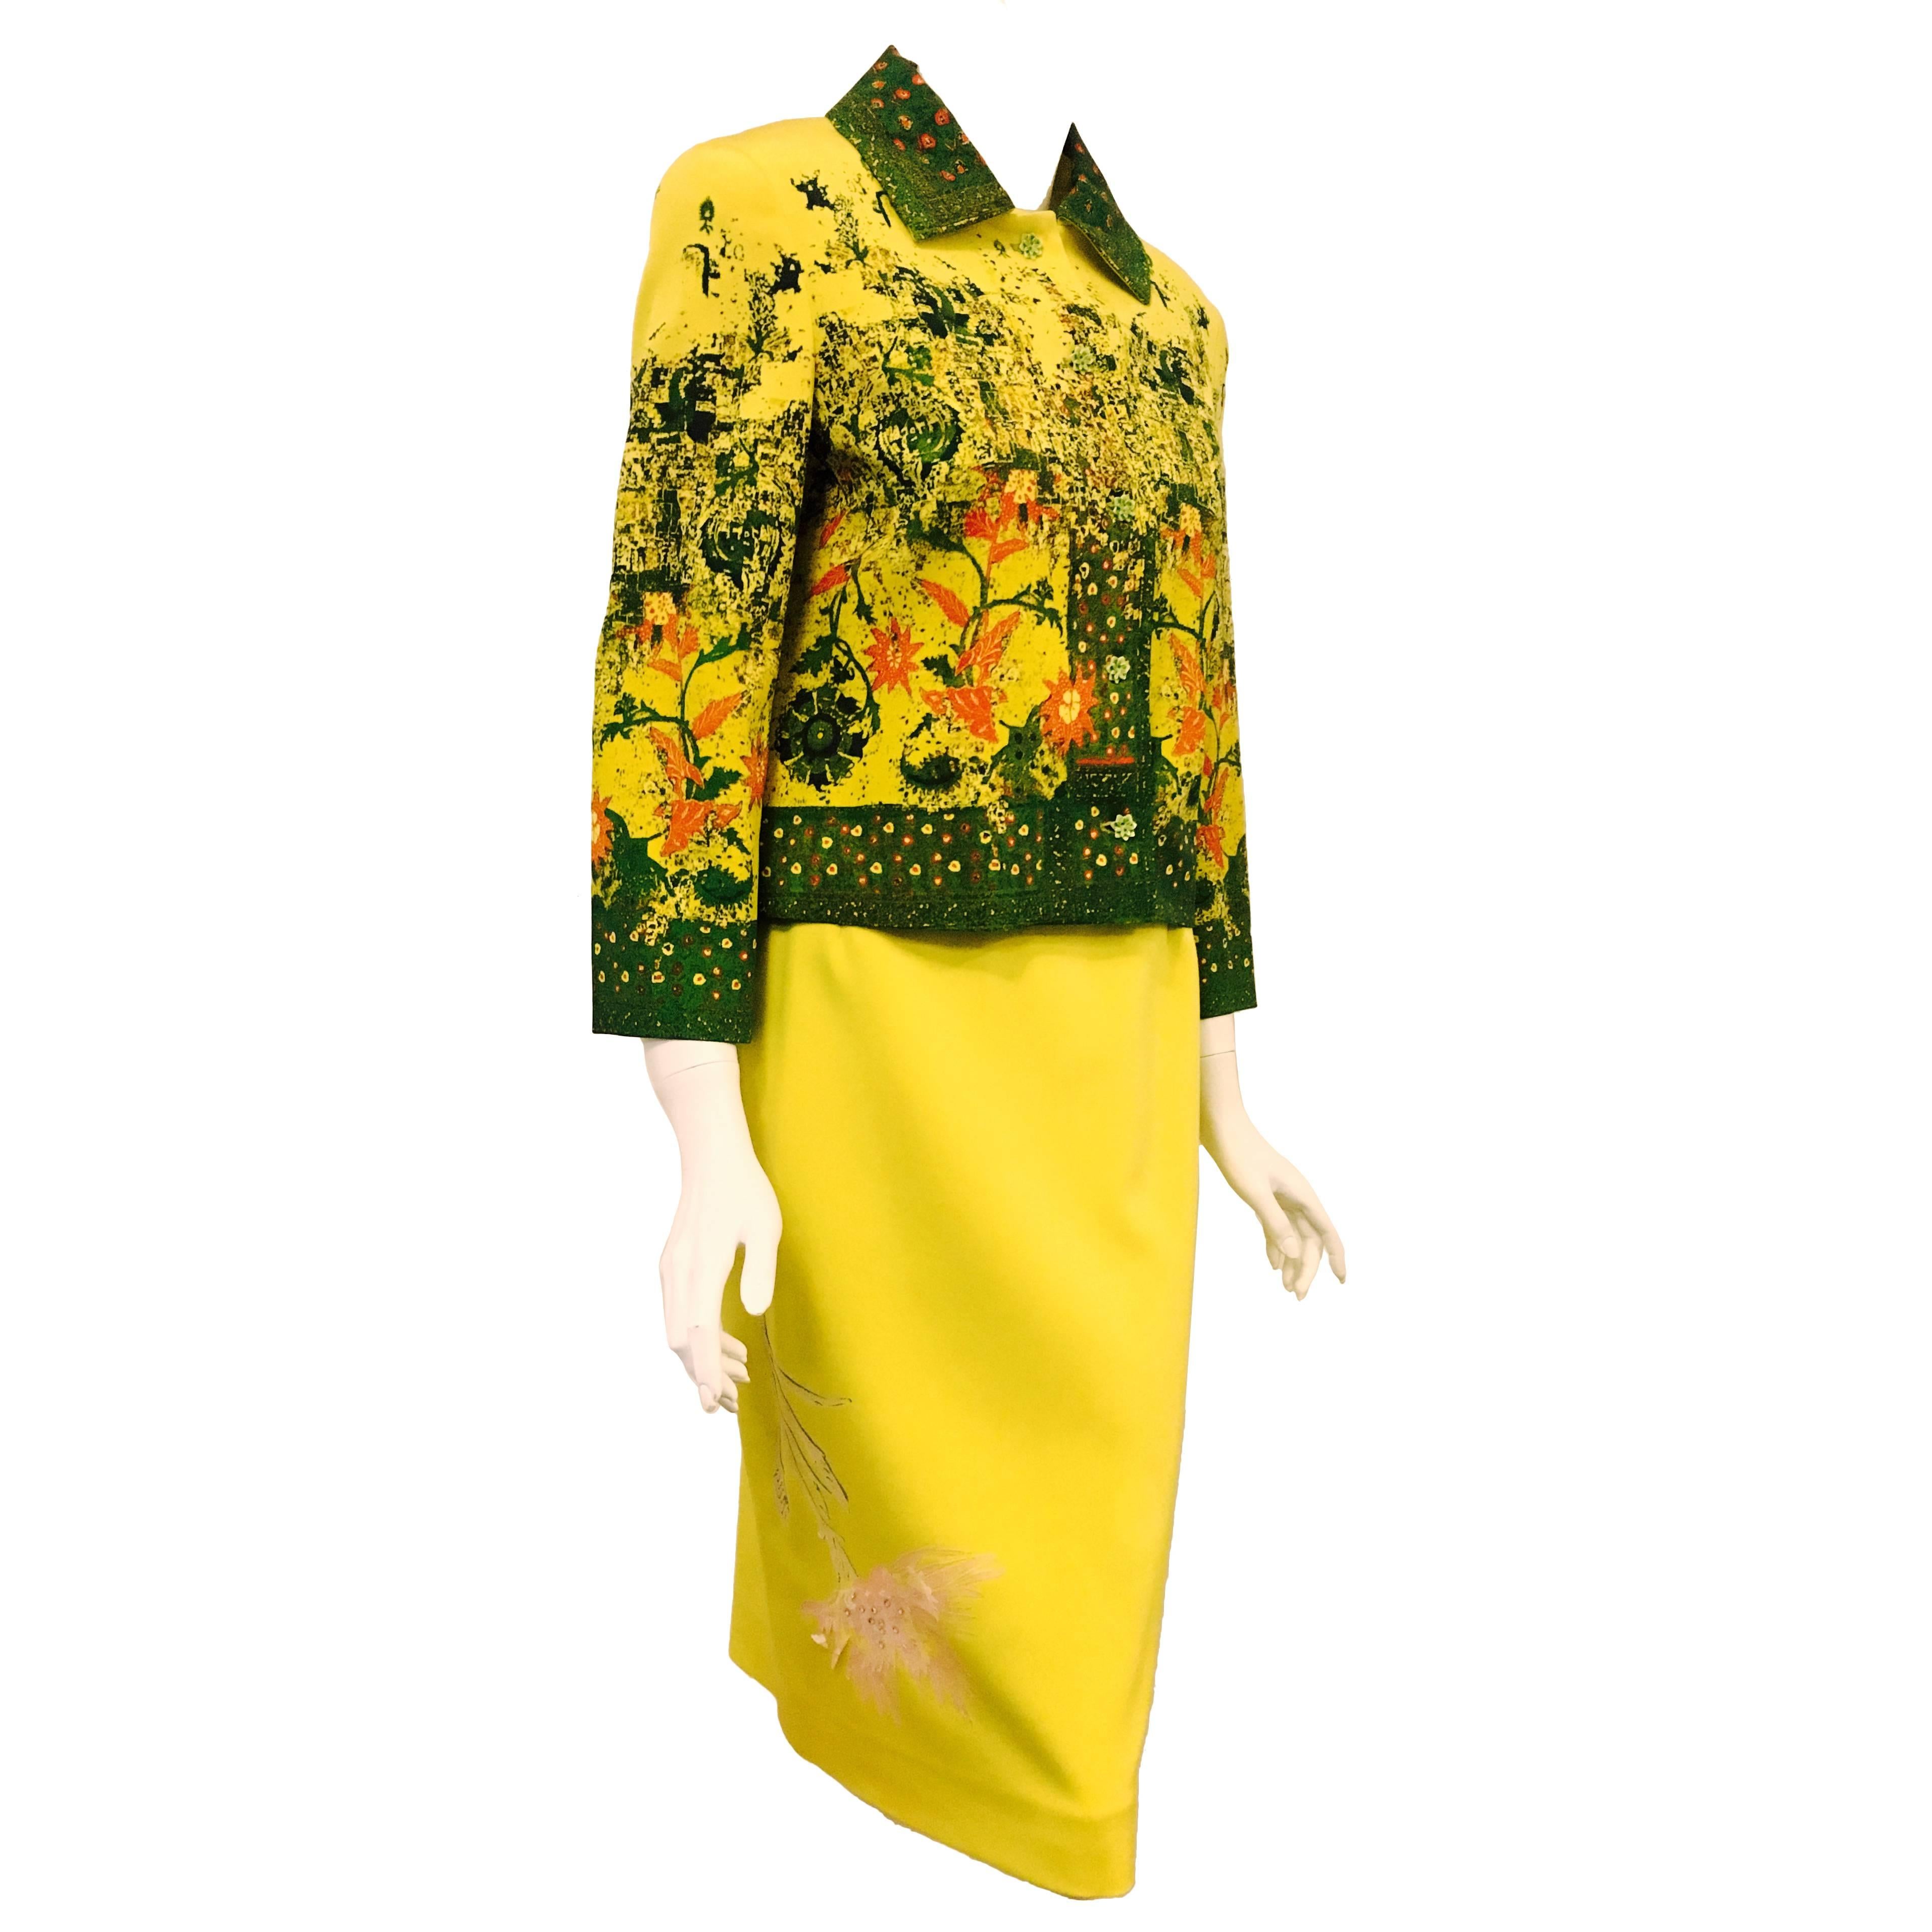 Christian Lacroix Green and Citrus Yellow Skirt Suit With Hand Painted Skirt